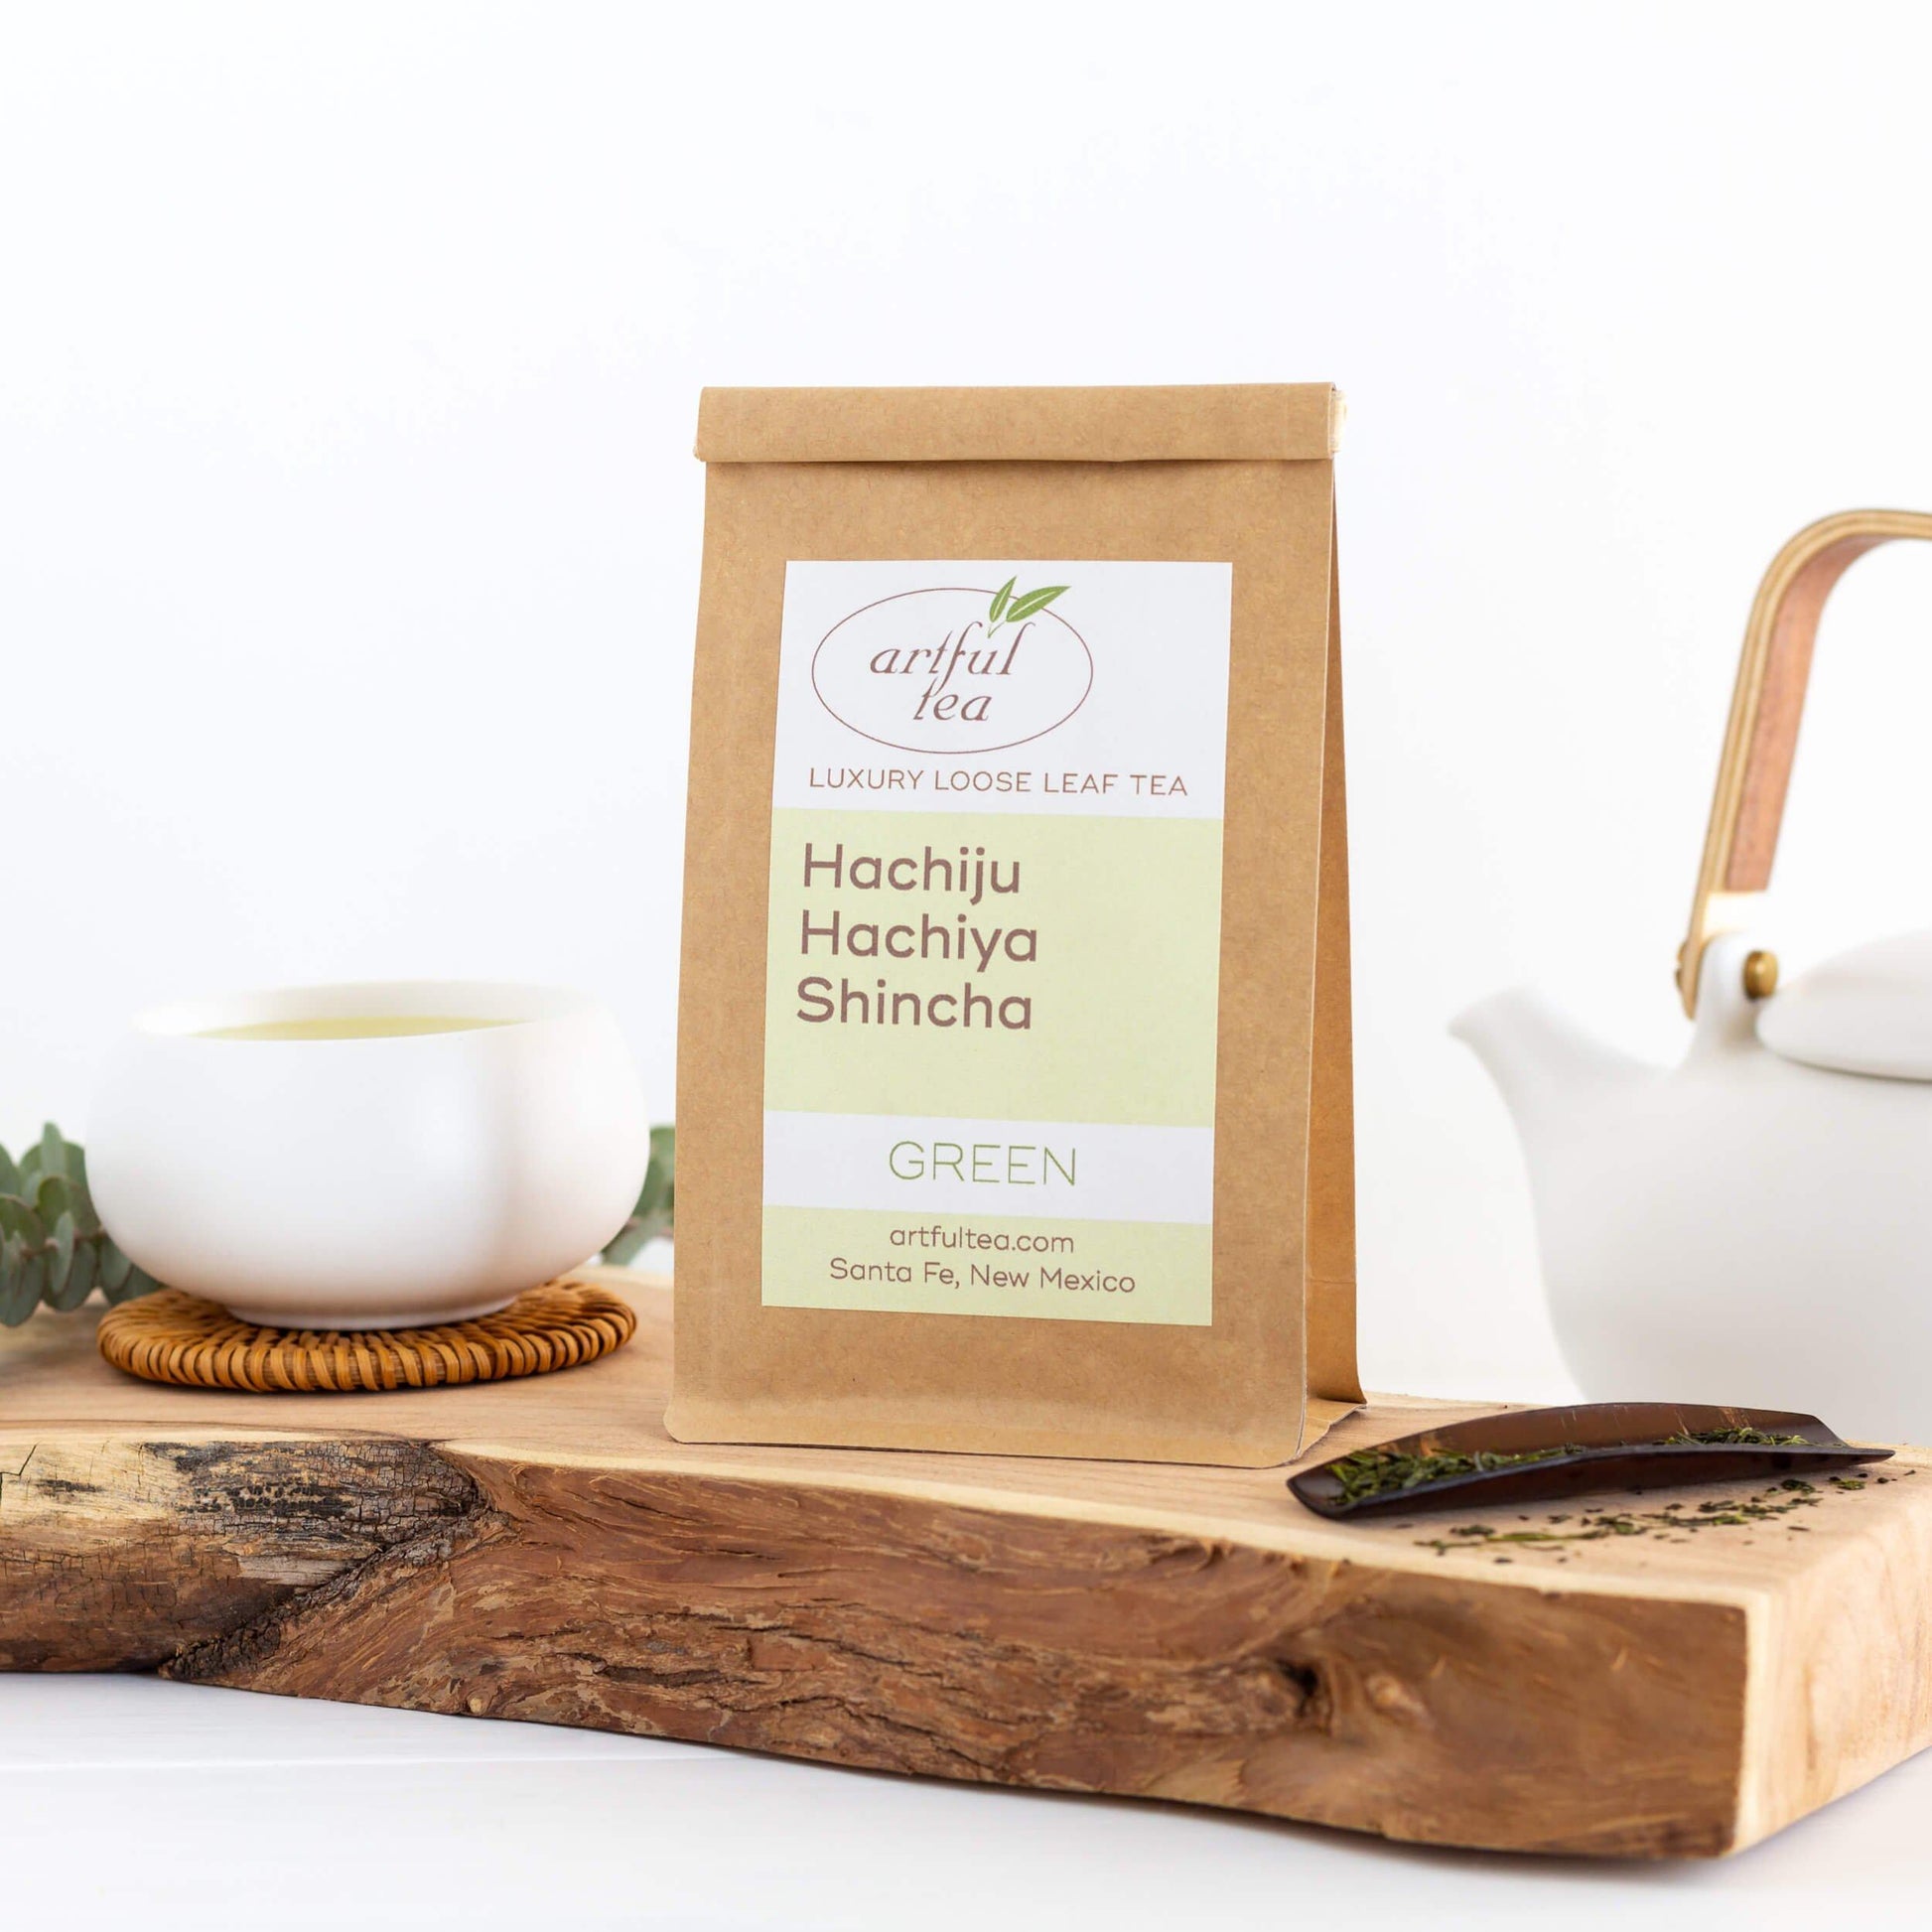 Shincha Green Tea shown packaged in a kraft bag, displayed on a wood plank next to a white cup. A white teapot is in the background.